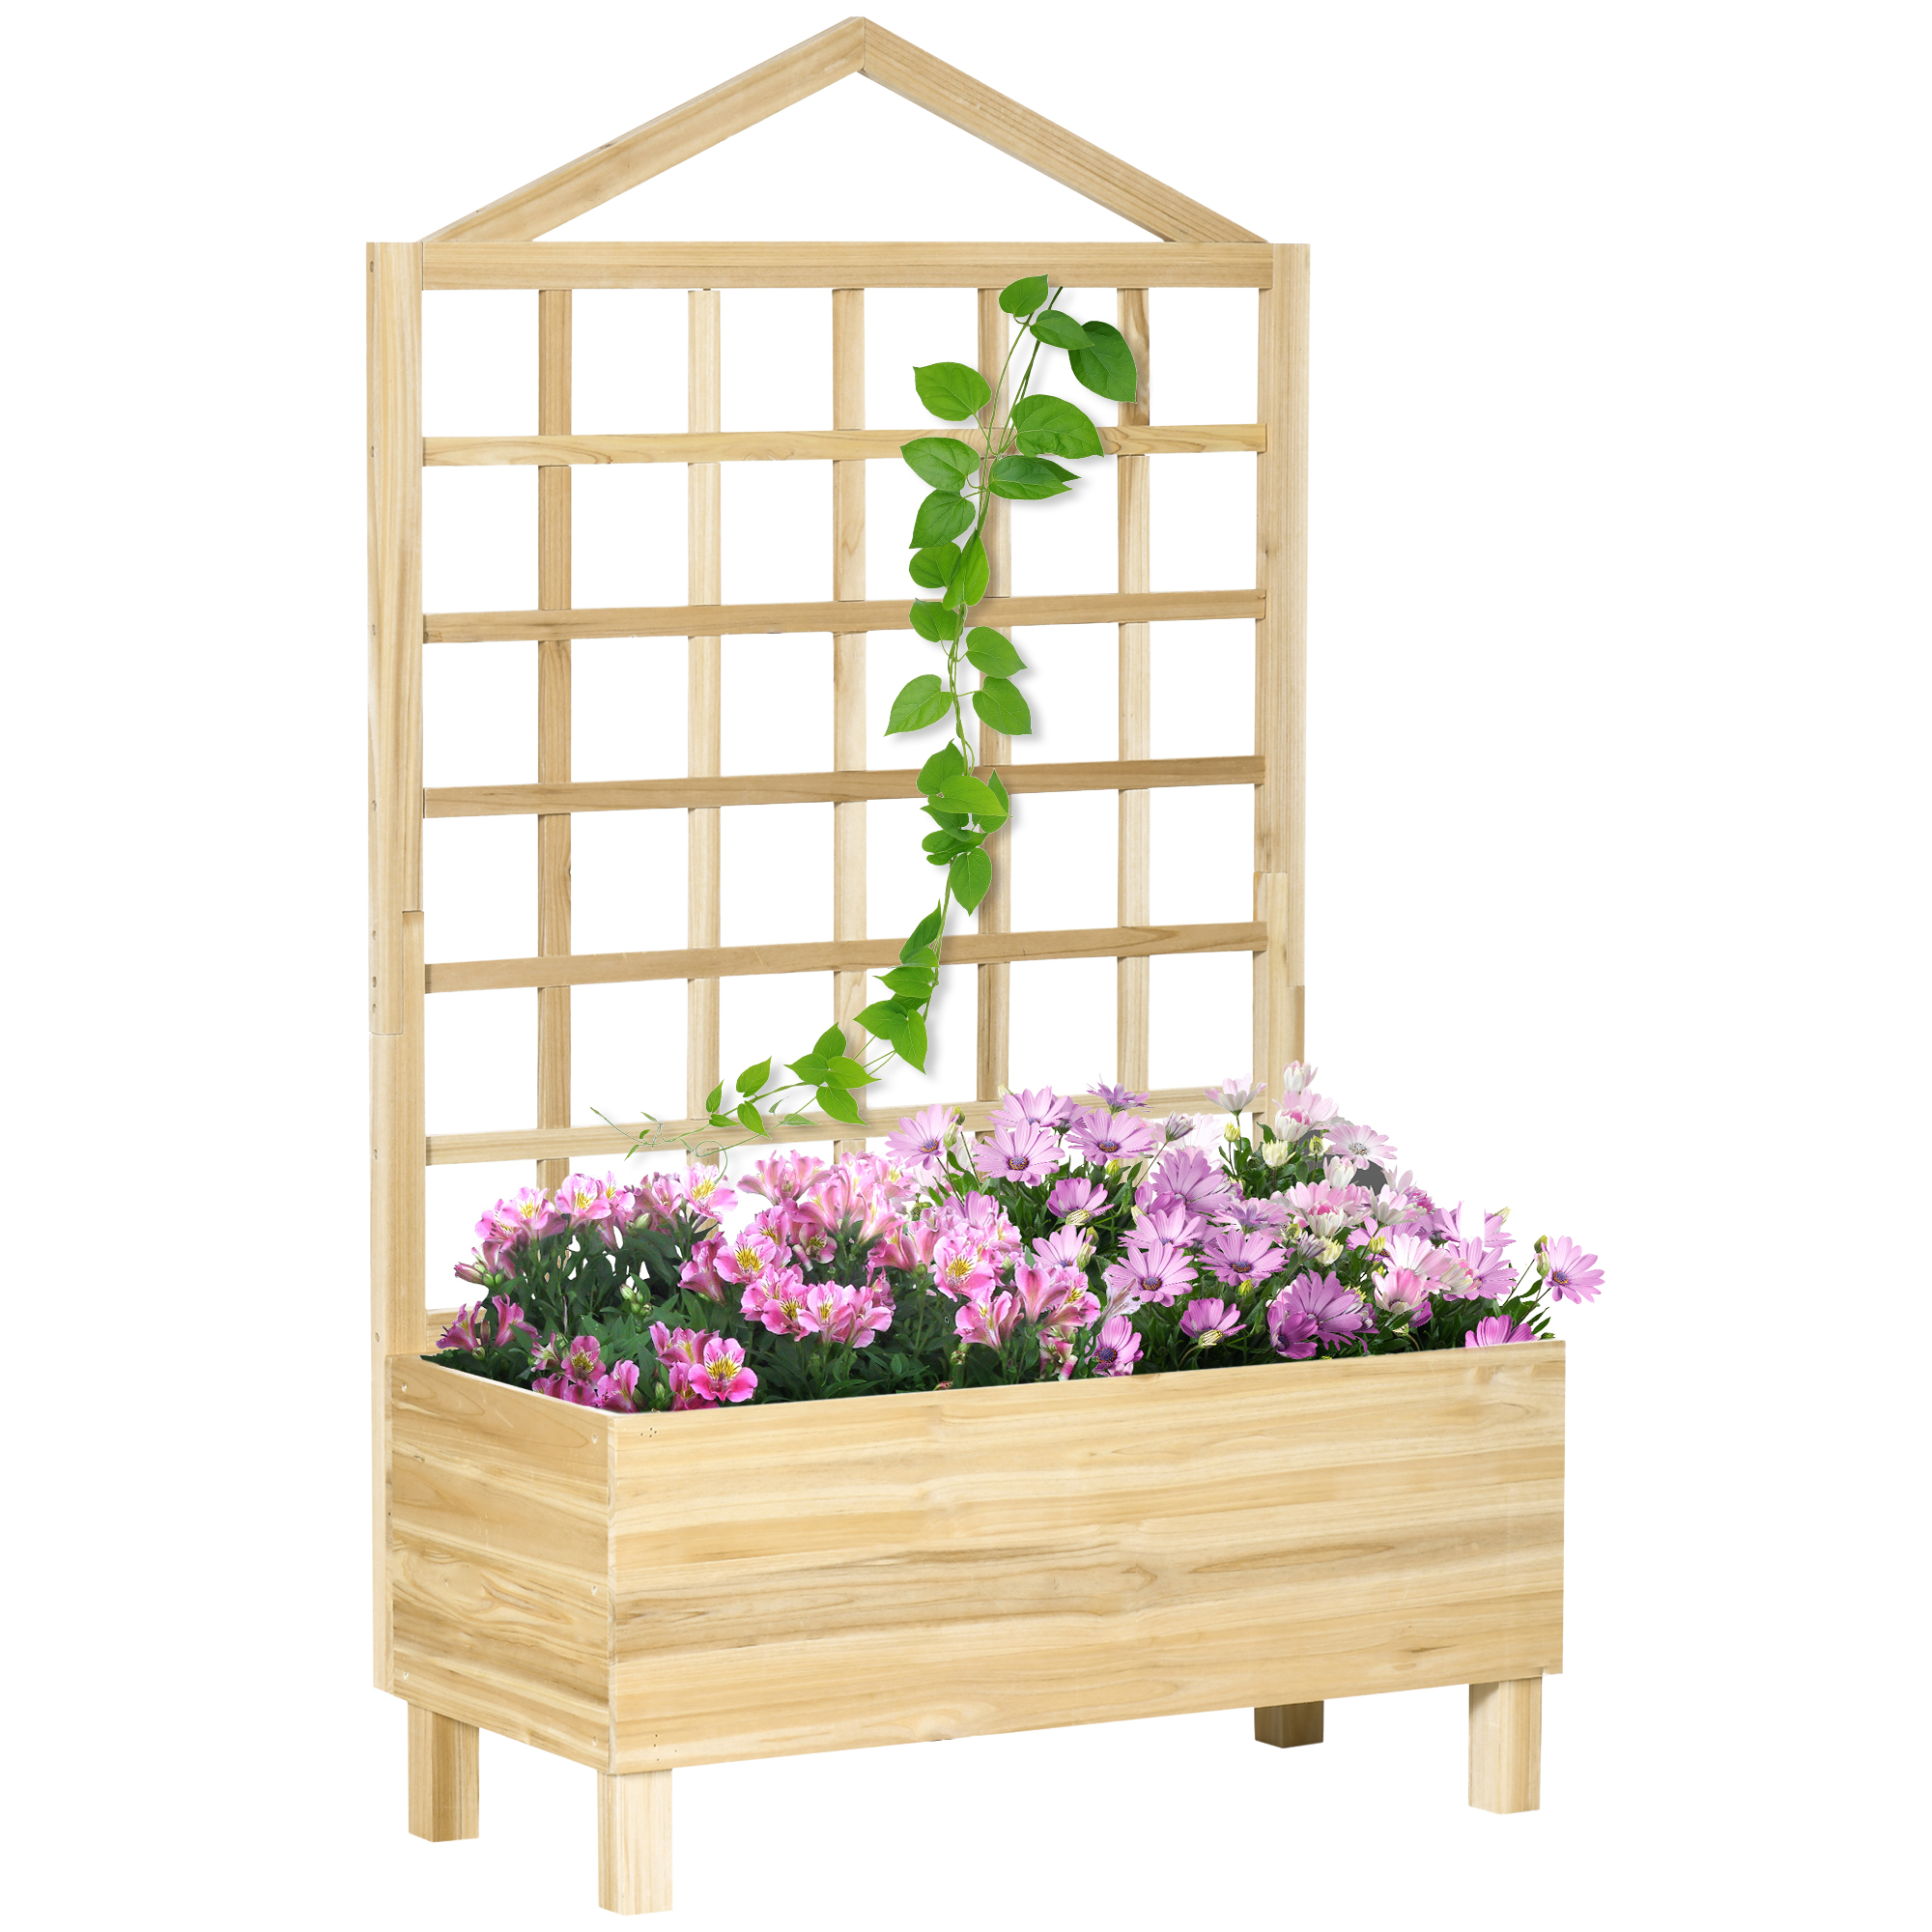 59" Raised Garden Bed Boxes with Trellis for Vine Climbing